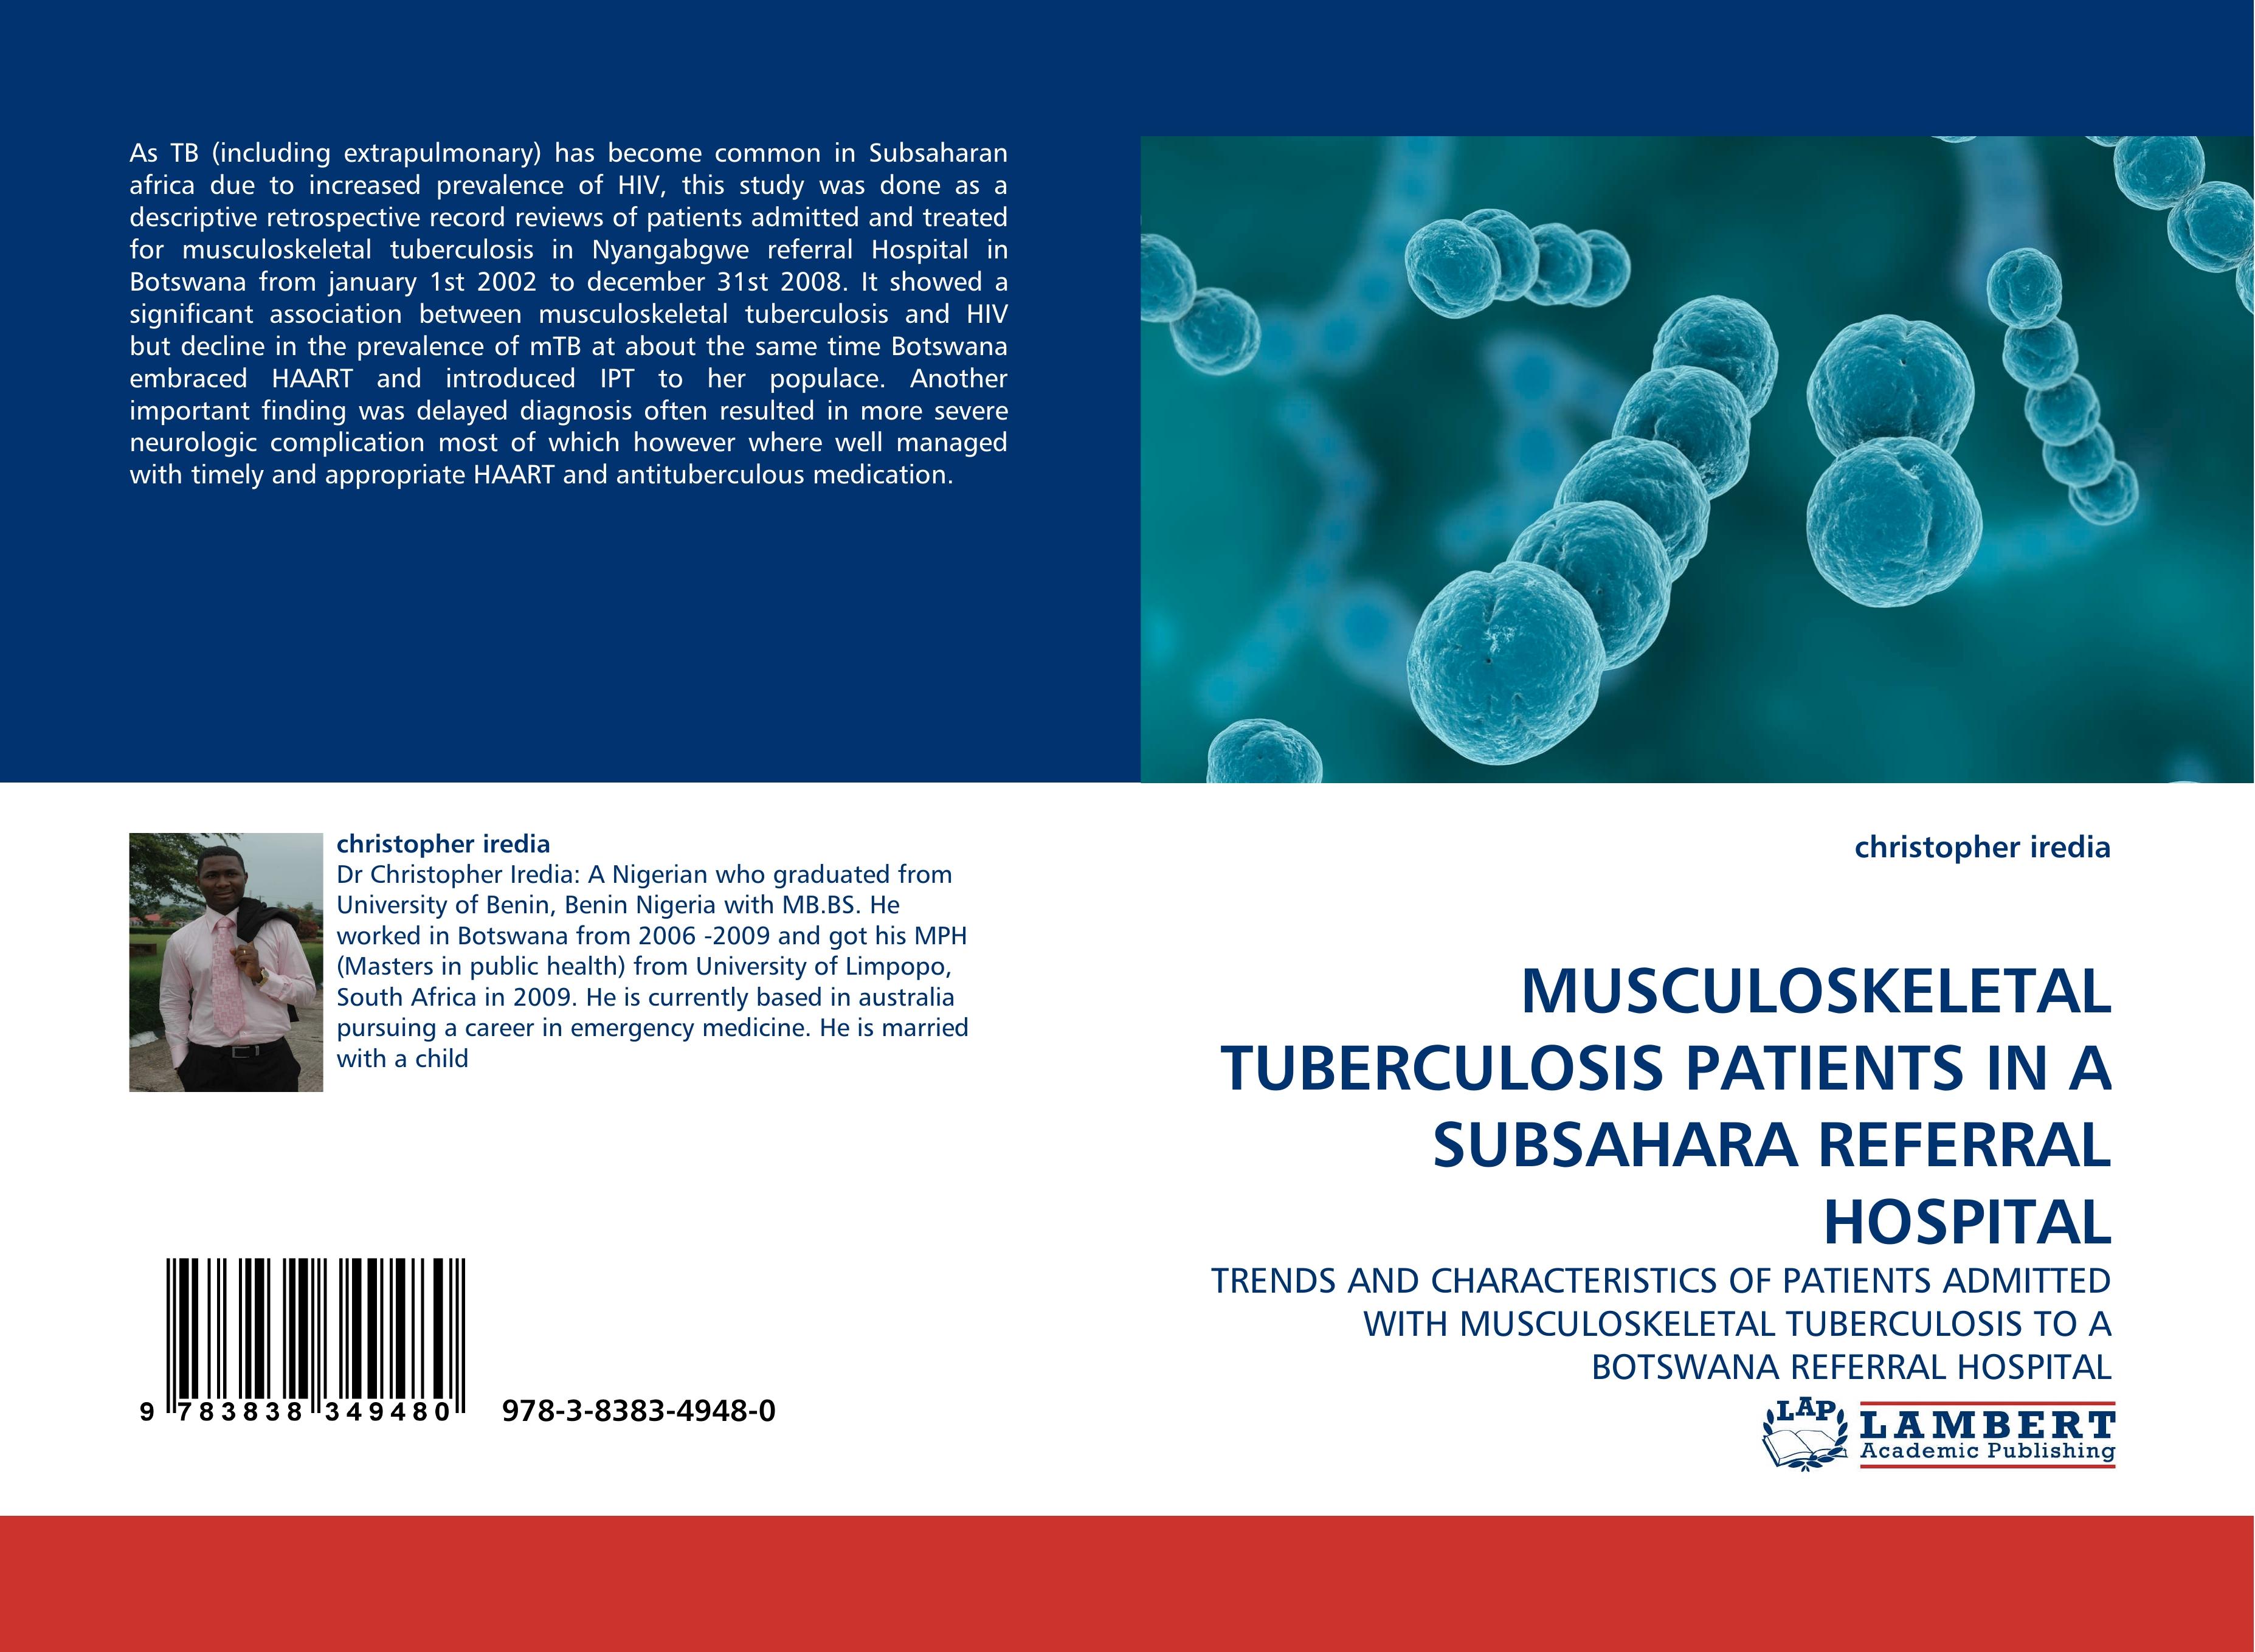 MUSCULOSKELETAL TUBERCULOSIS PATIENTS IN A SUBSAHARA REFERRAL HOSPITAL / TRENDS AND CHARACTERISTICS OF PATIENTS ADMITTED WITH MUSCULOSKELETAL TUBERCULOSIS TO A BOTSWANA REFERRAL HOSPITAL / Iredia - Iredia, Christopher